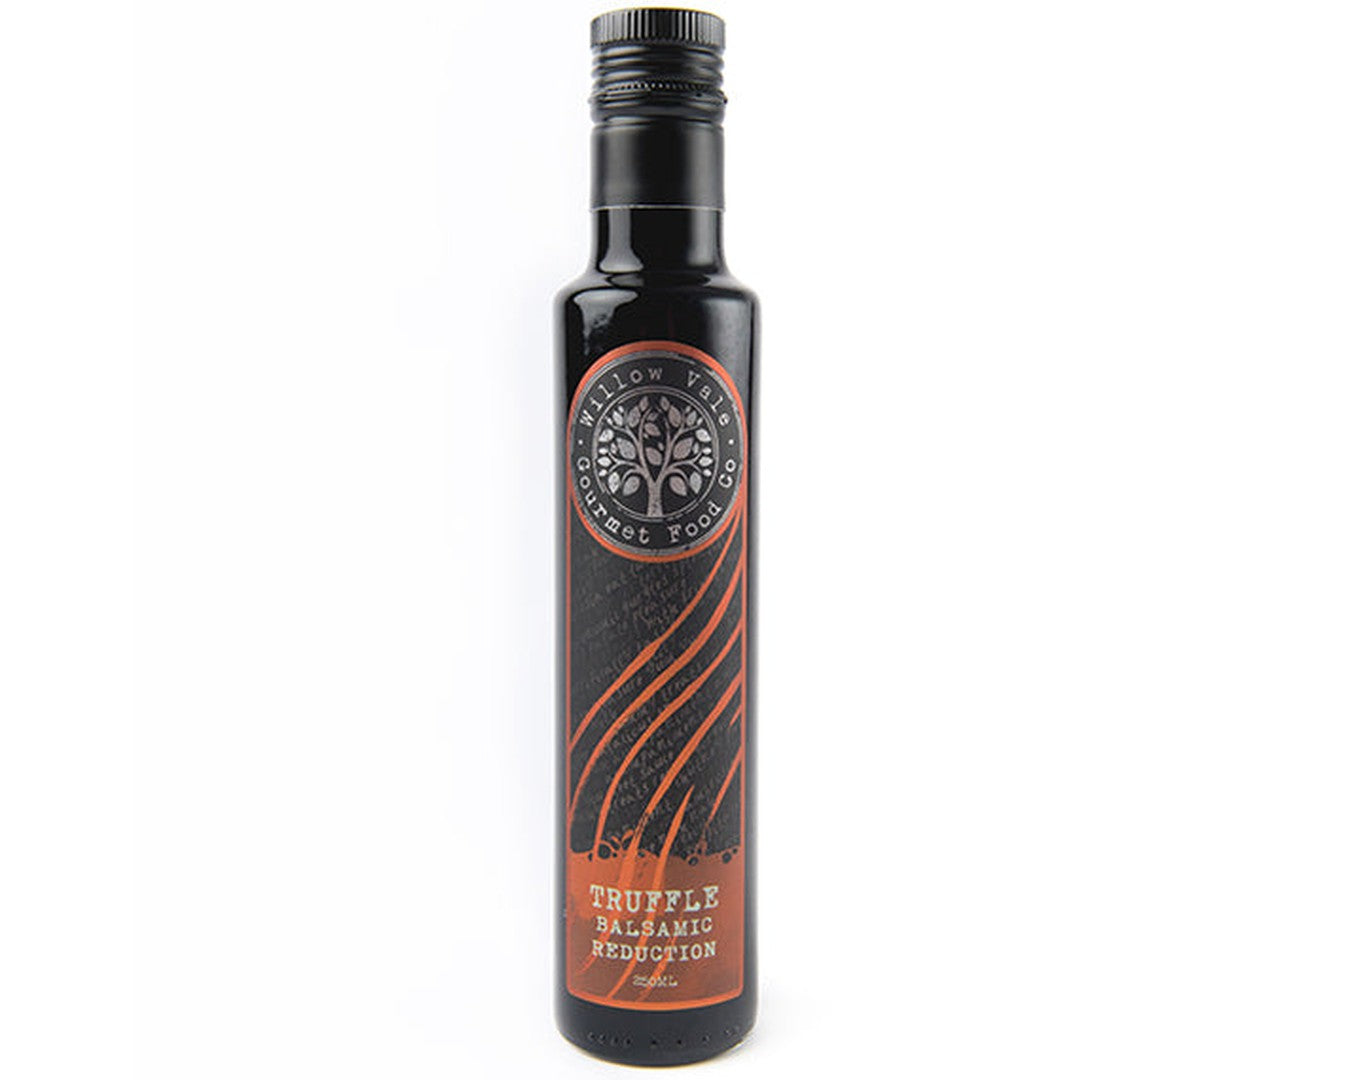 Willow Vale Truff Balsamic Reduction 250ml-Balsamic-The Local Basket